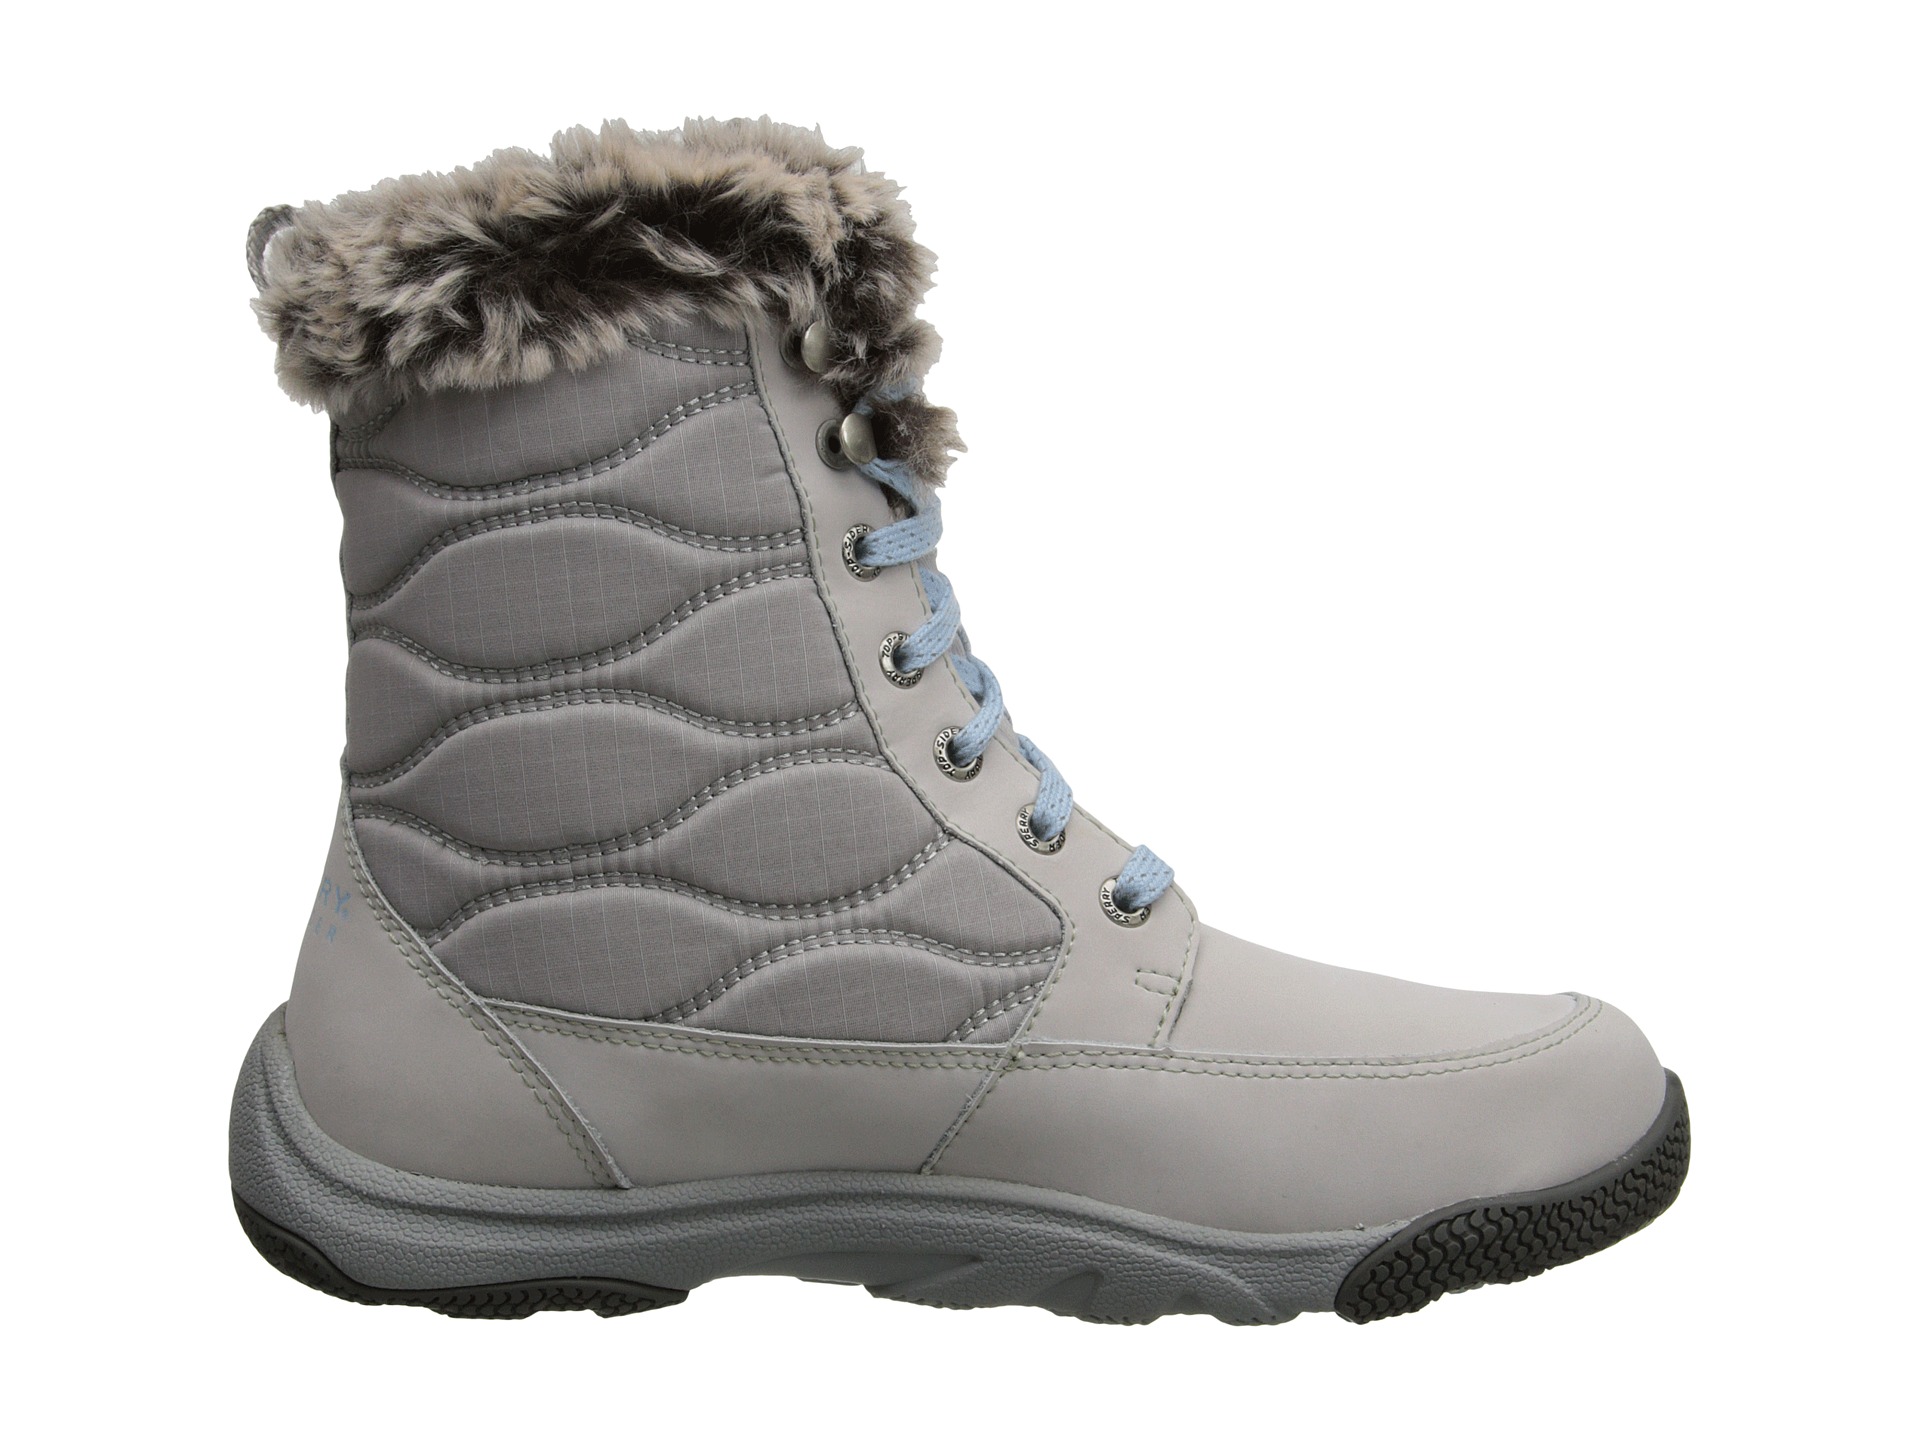 Sperry Top Sider Winter Cove Boot Light Grey | Shipped Free at Zappos